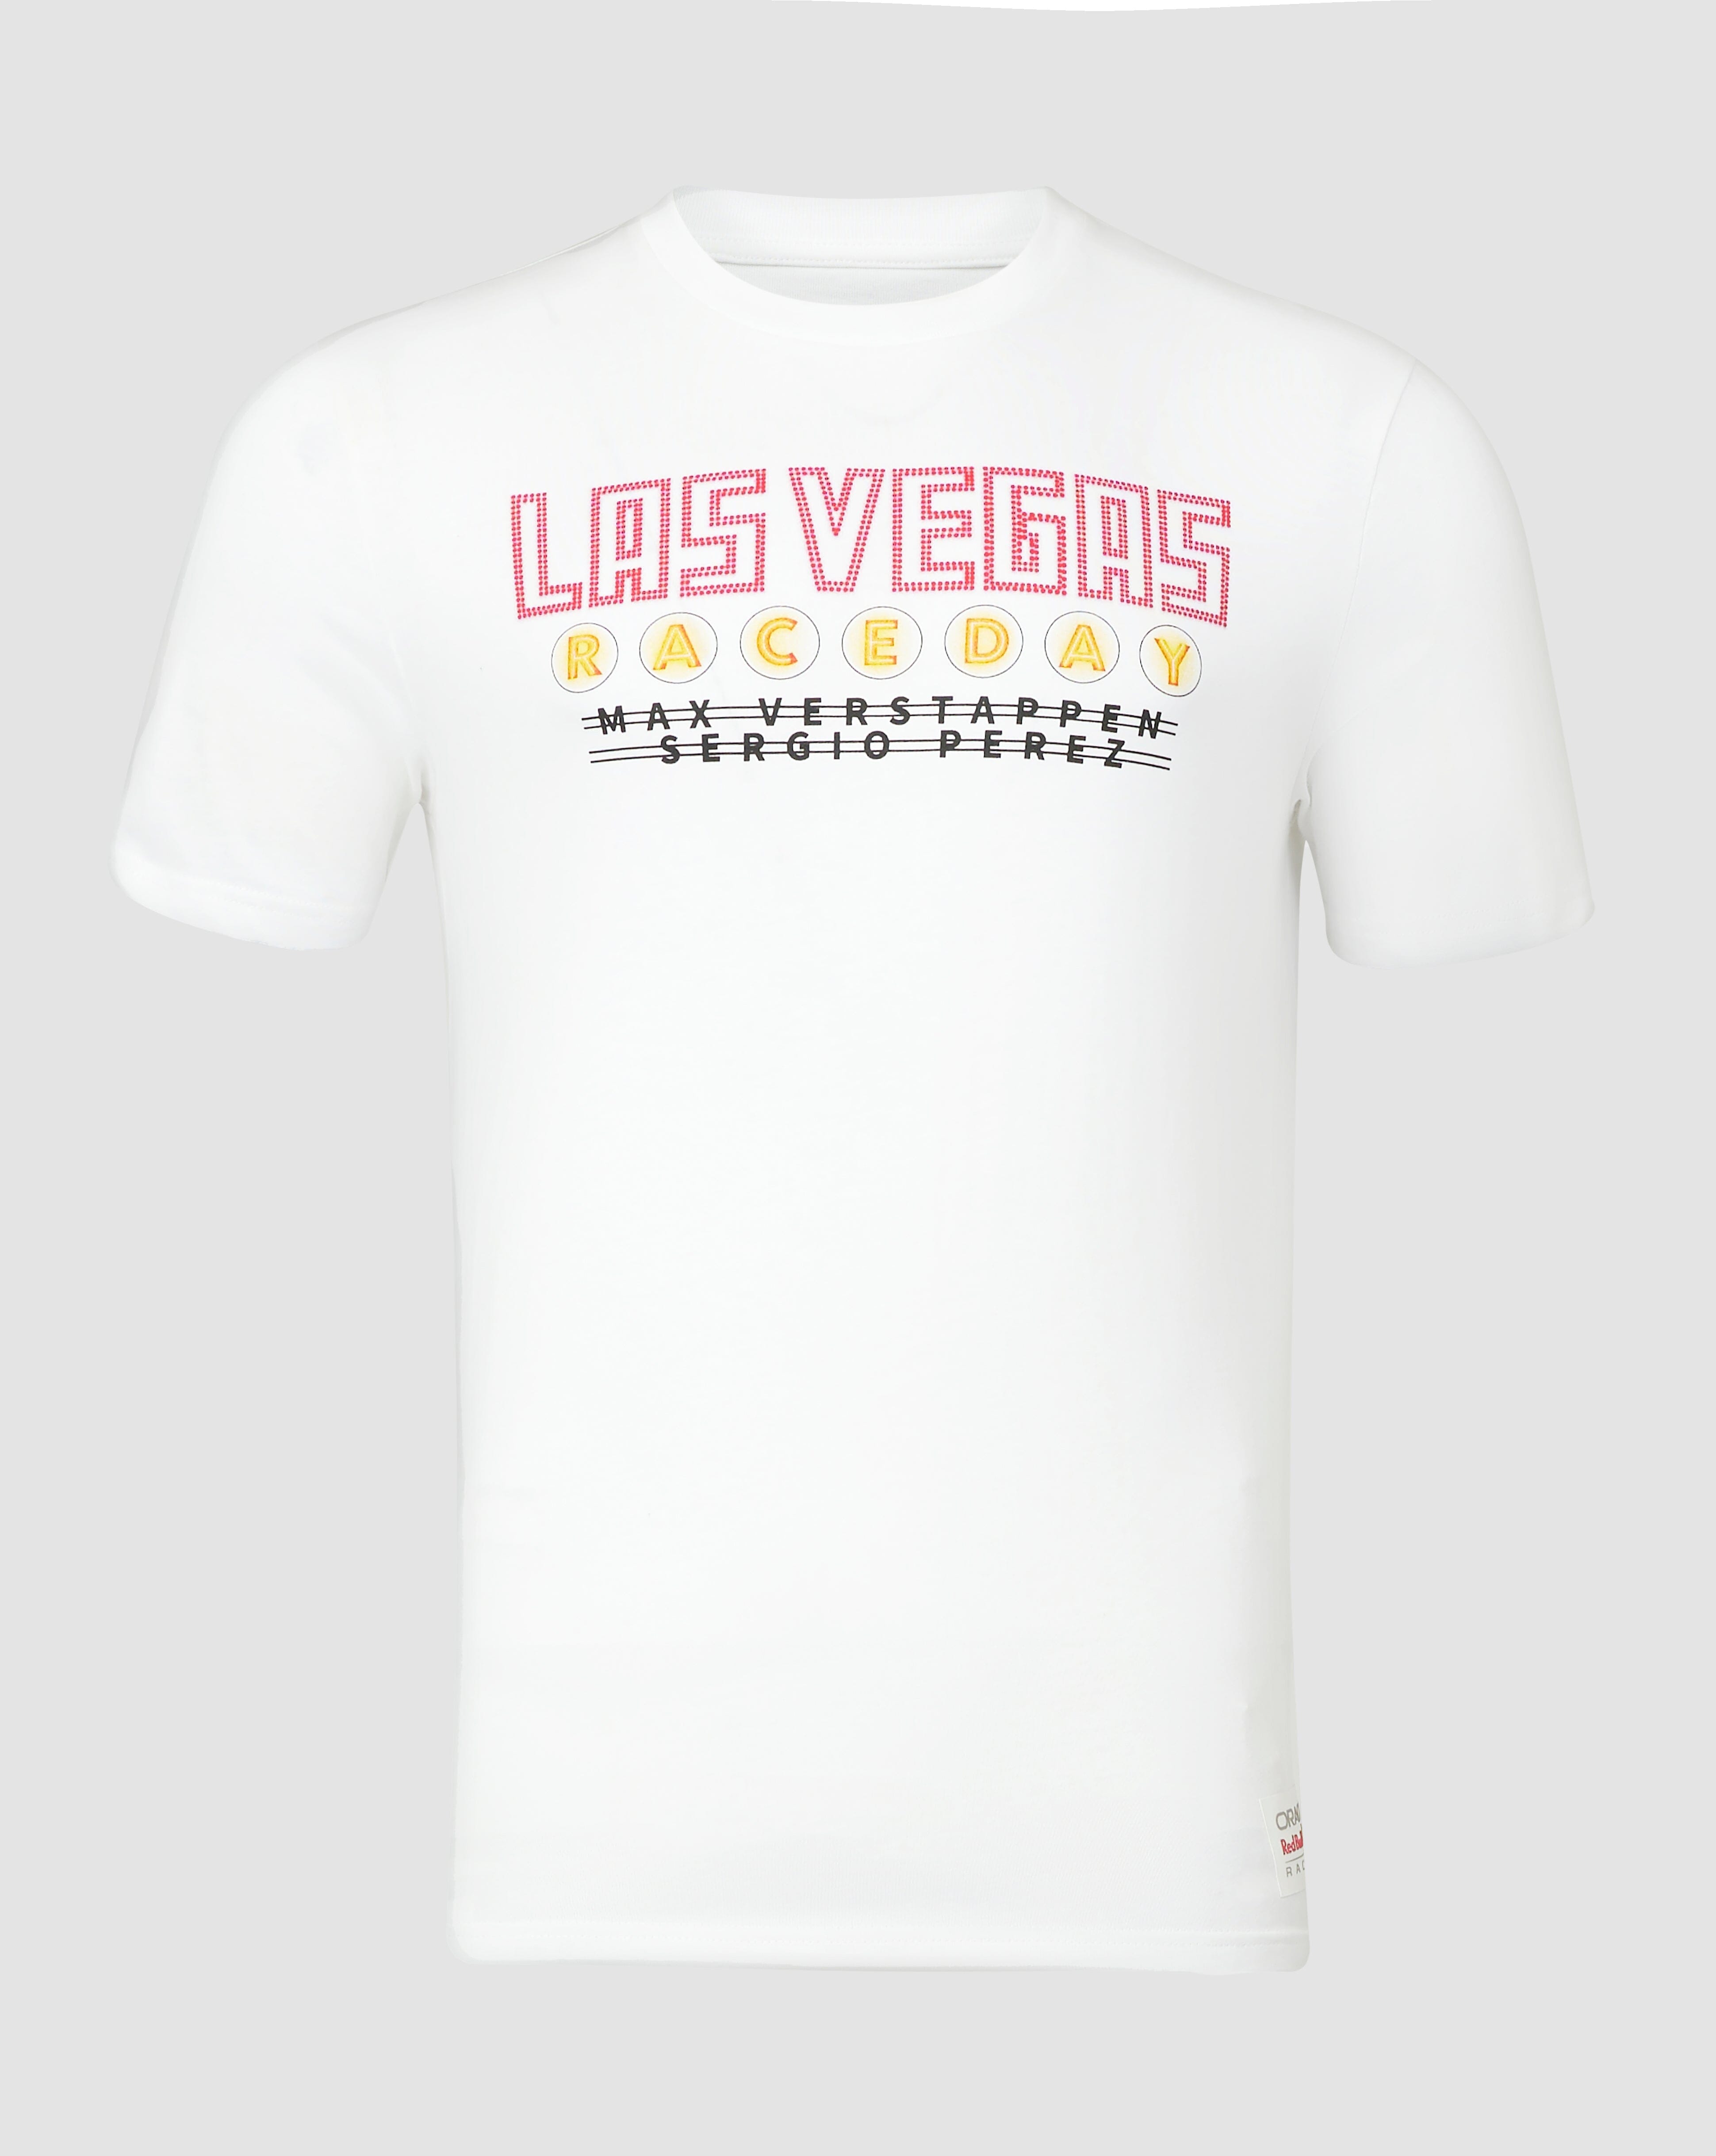 Edition T-Shirt Red Special Racing Las GP Bull F1 - White Vegas